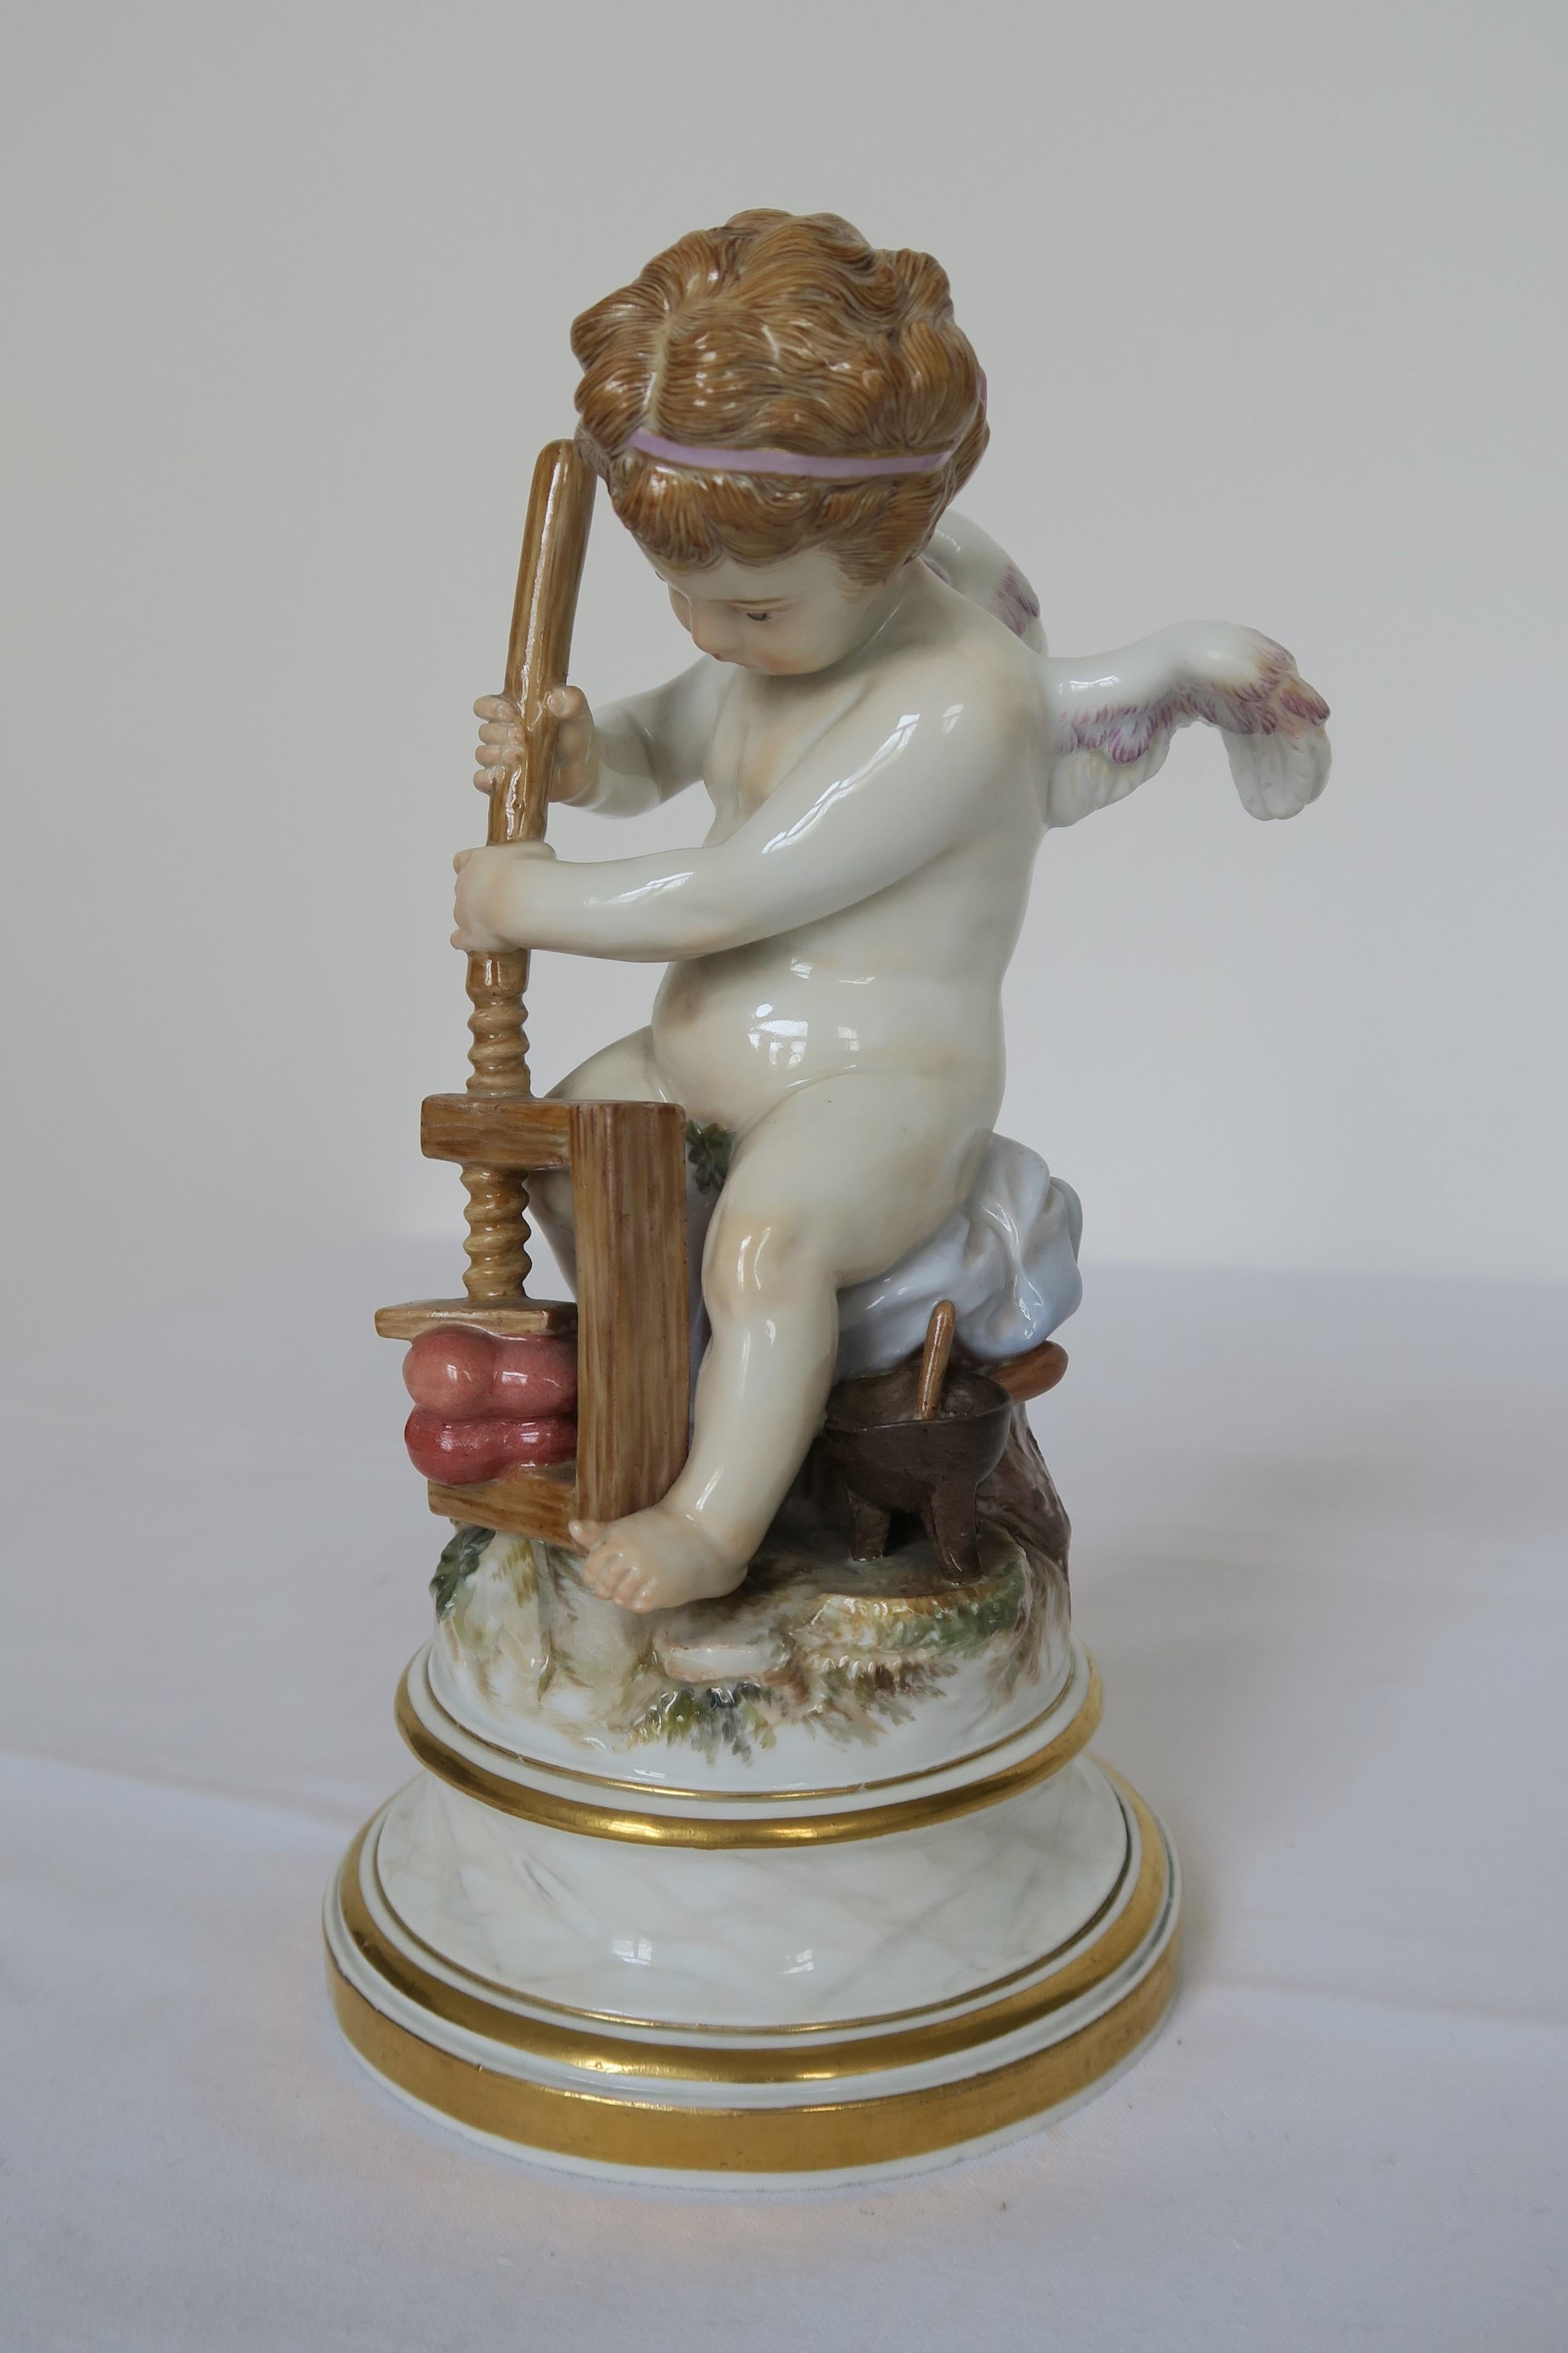 This is a beautiful figurine of a flush little cherub. He is sat on a grassy hill, squeezing two hearts together representing the merging of two people's loves and the possible agony that love can bring. It is made of porcelain by renowned German